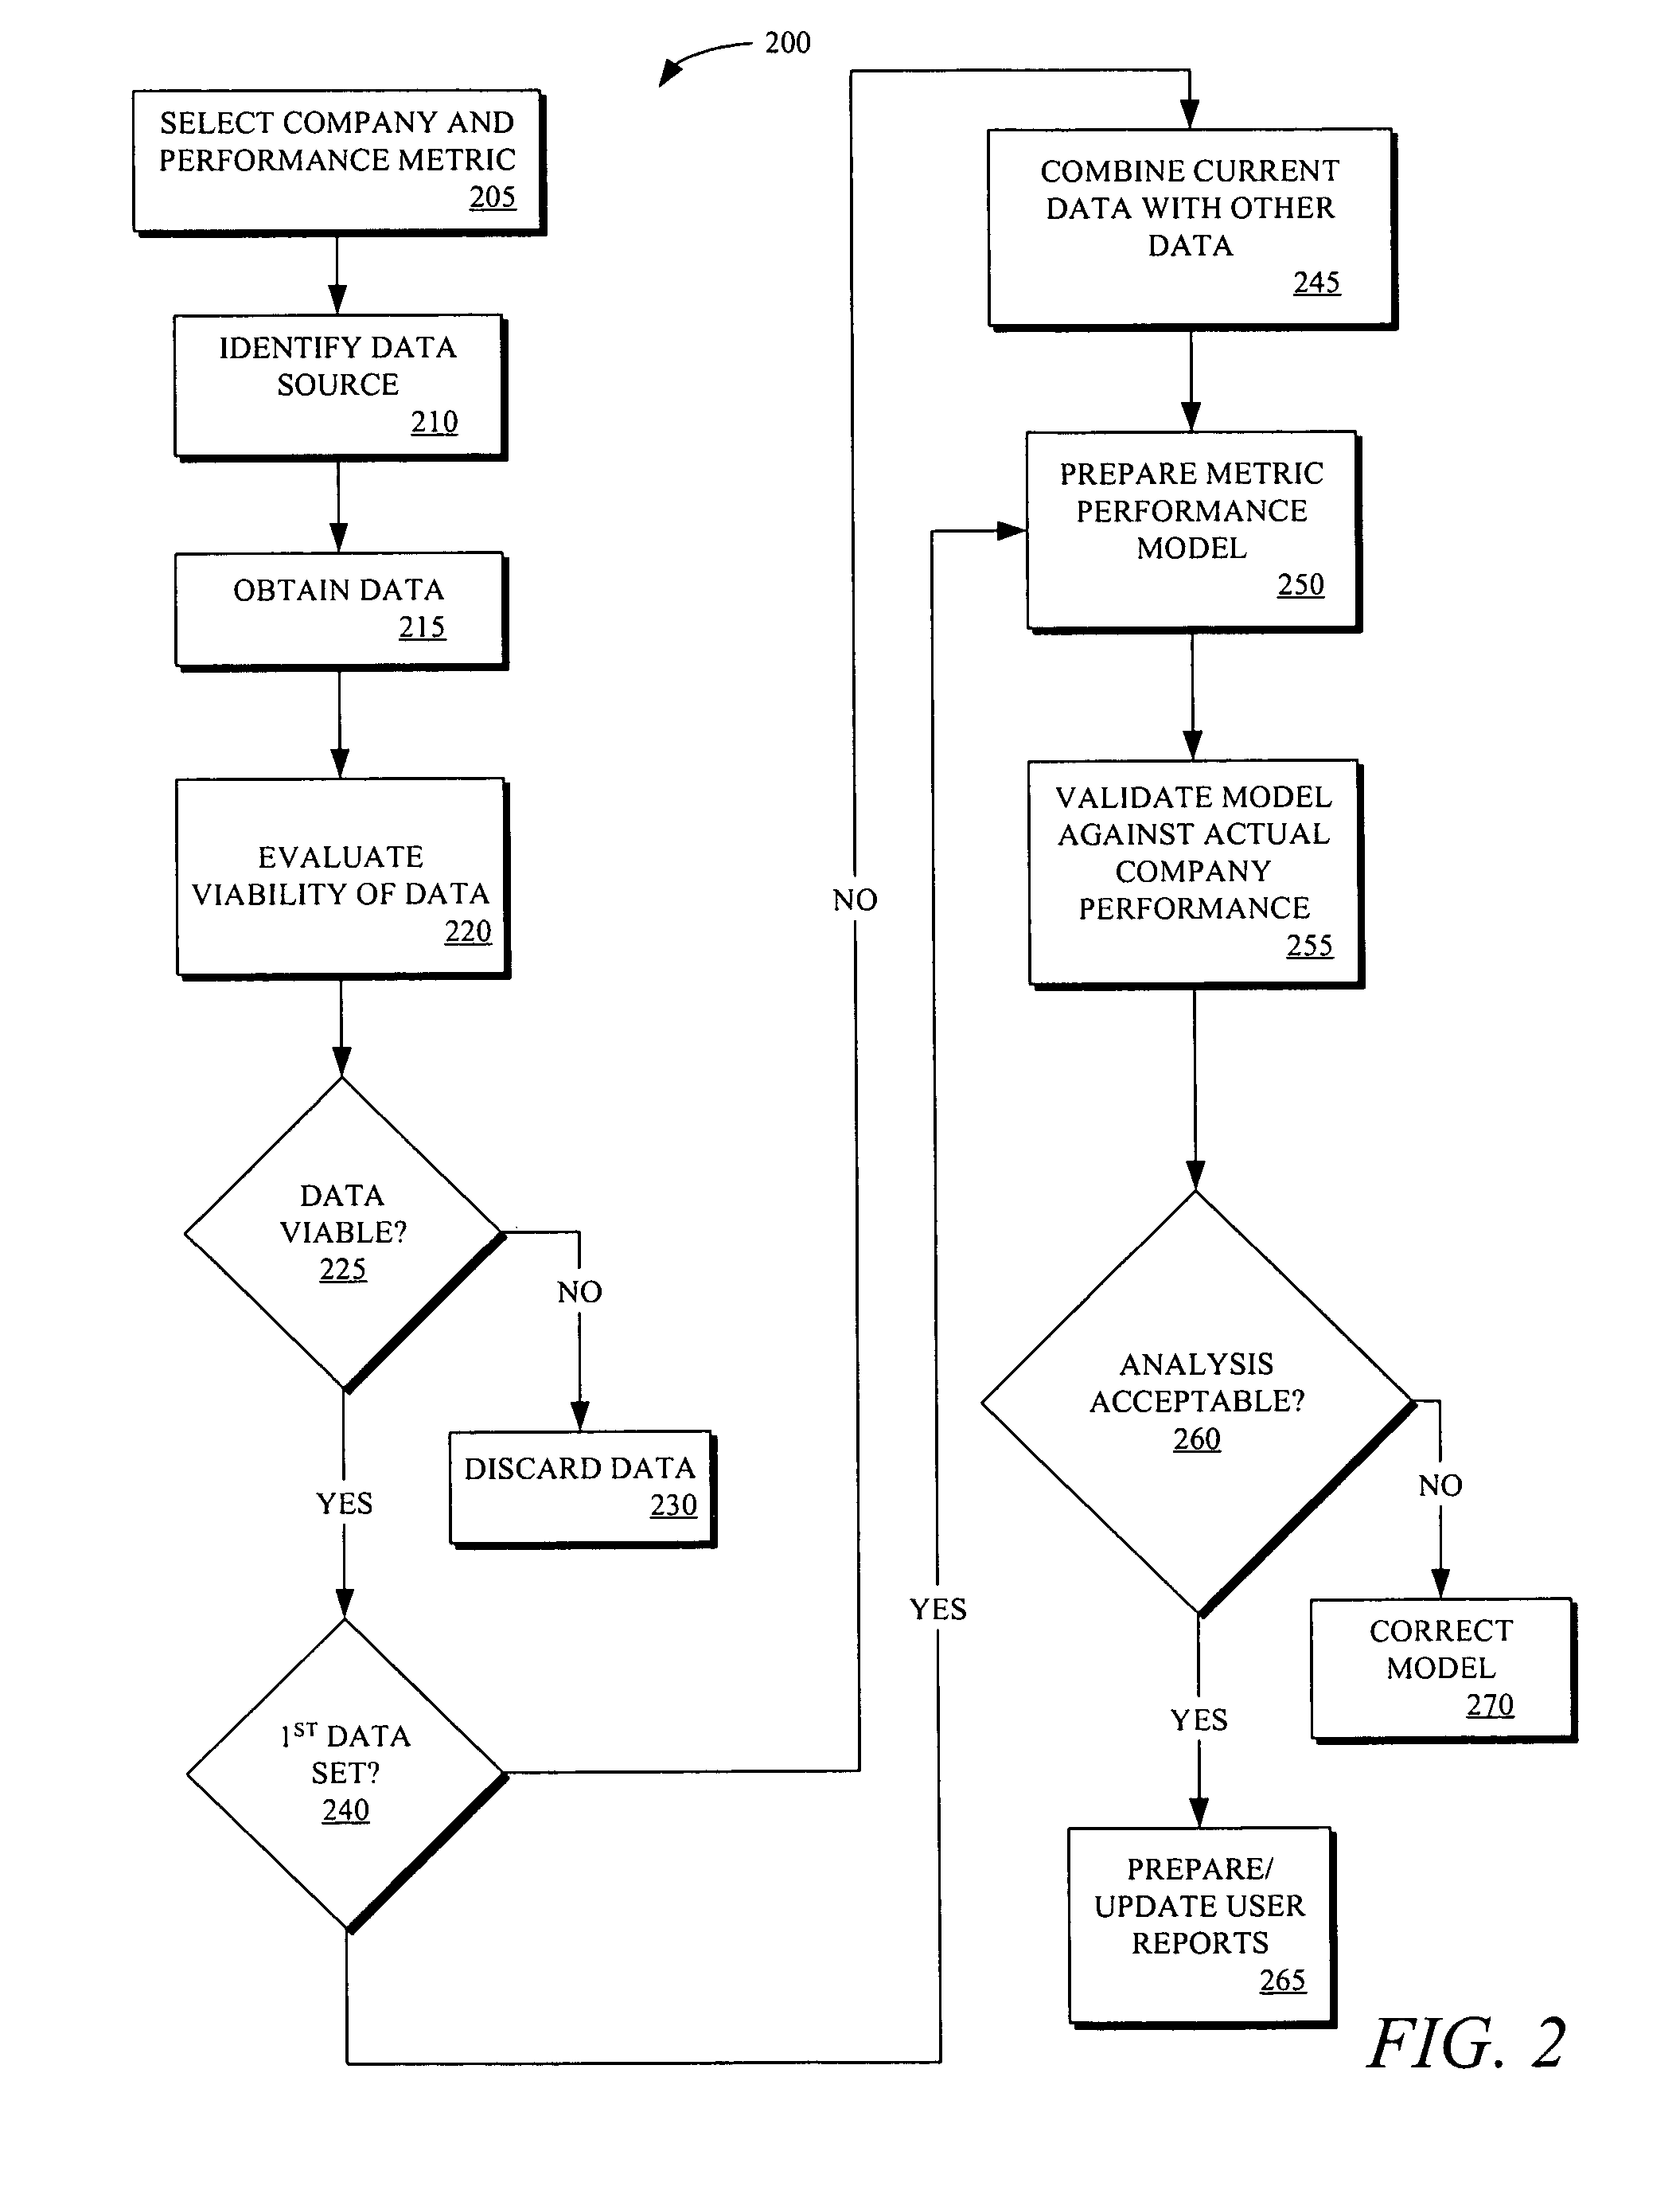 Methods and systems for using multiple data sets to analyze performance metrics of targeted companies